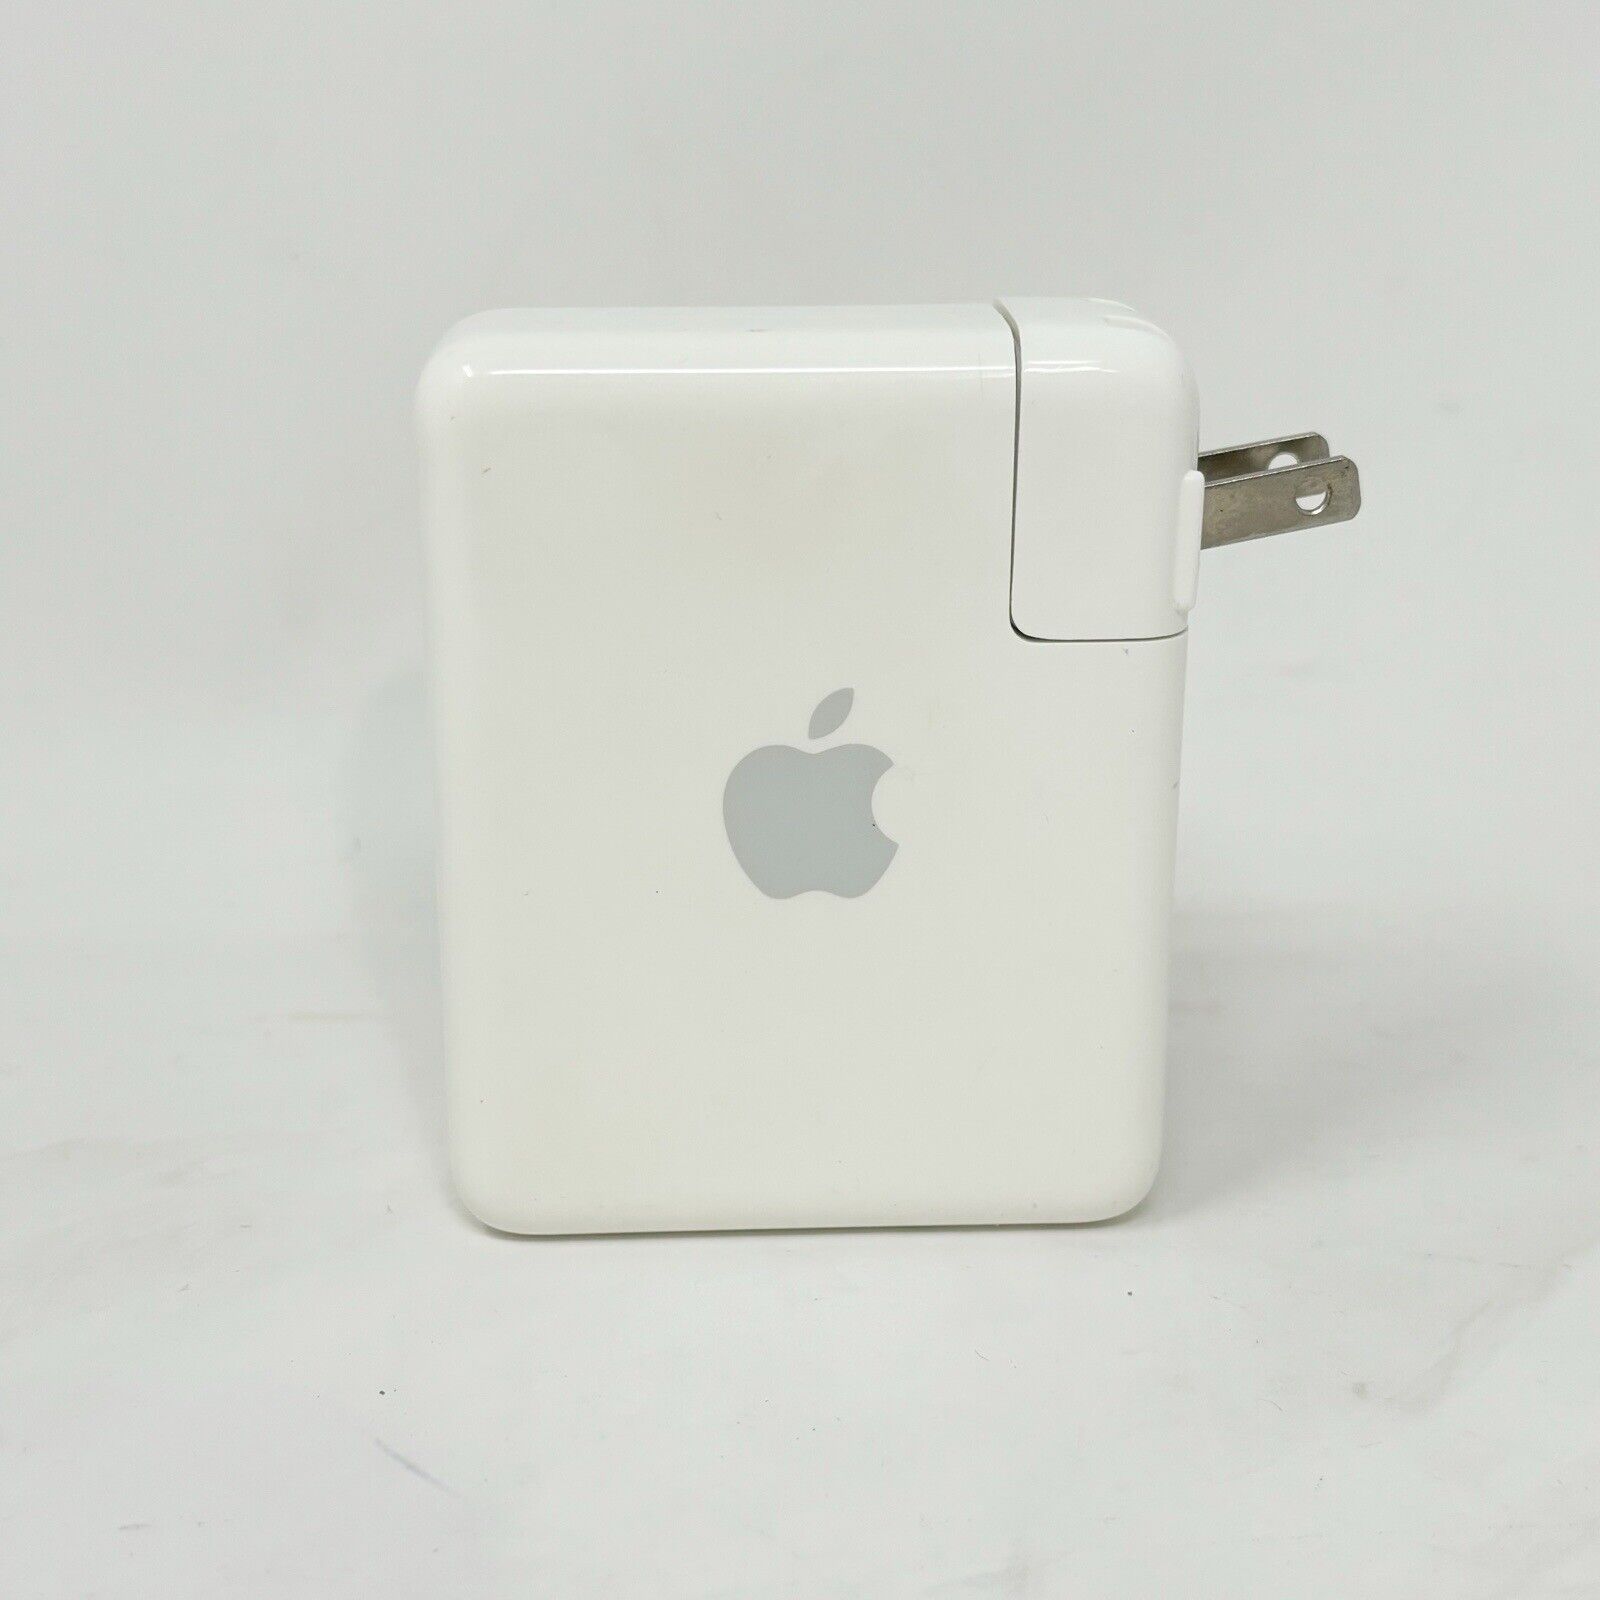 Apple AirPort Express 802.11n Base Station | A1264 (1st Generation) Wifi Router